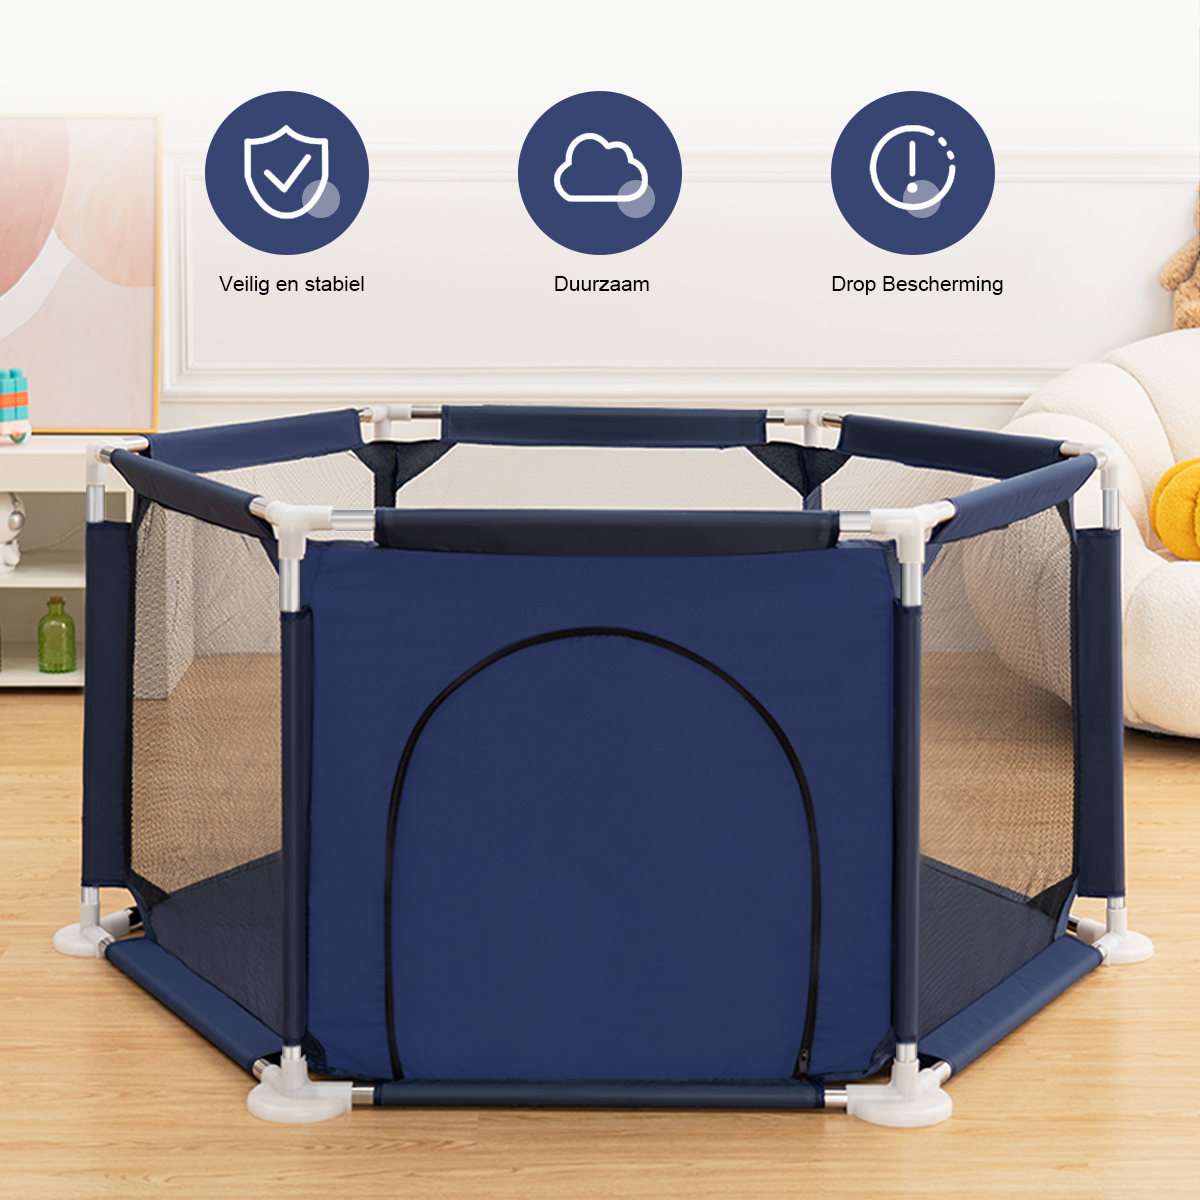 Comomy 6 Sided Baby Playpen for Babies Baby Playard Infants Toddler 6 Panels Safety Folding Indoor Outdoor Kids Play Pens Baby Fence Game Toy Pool Tent